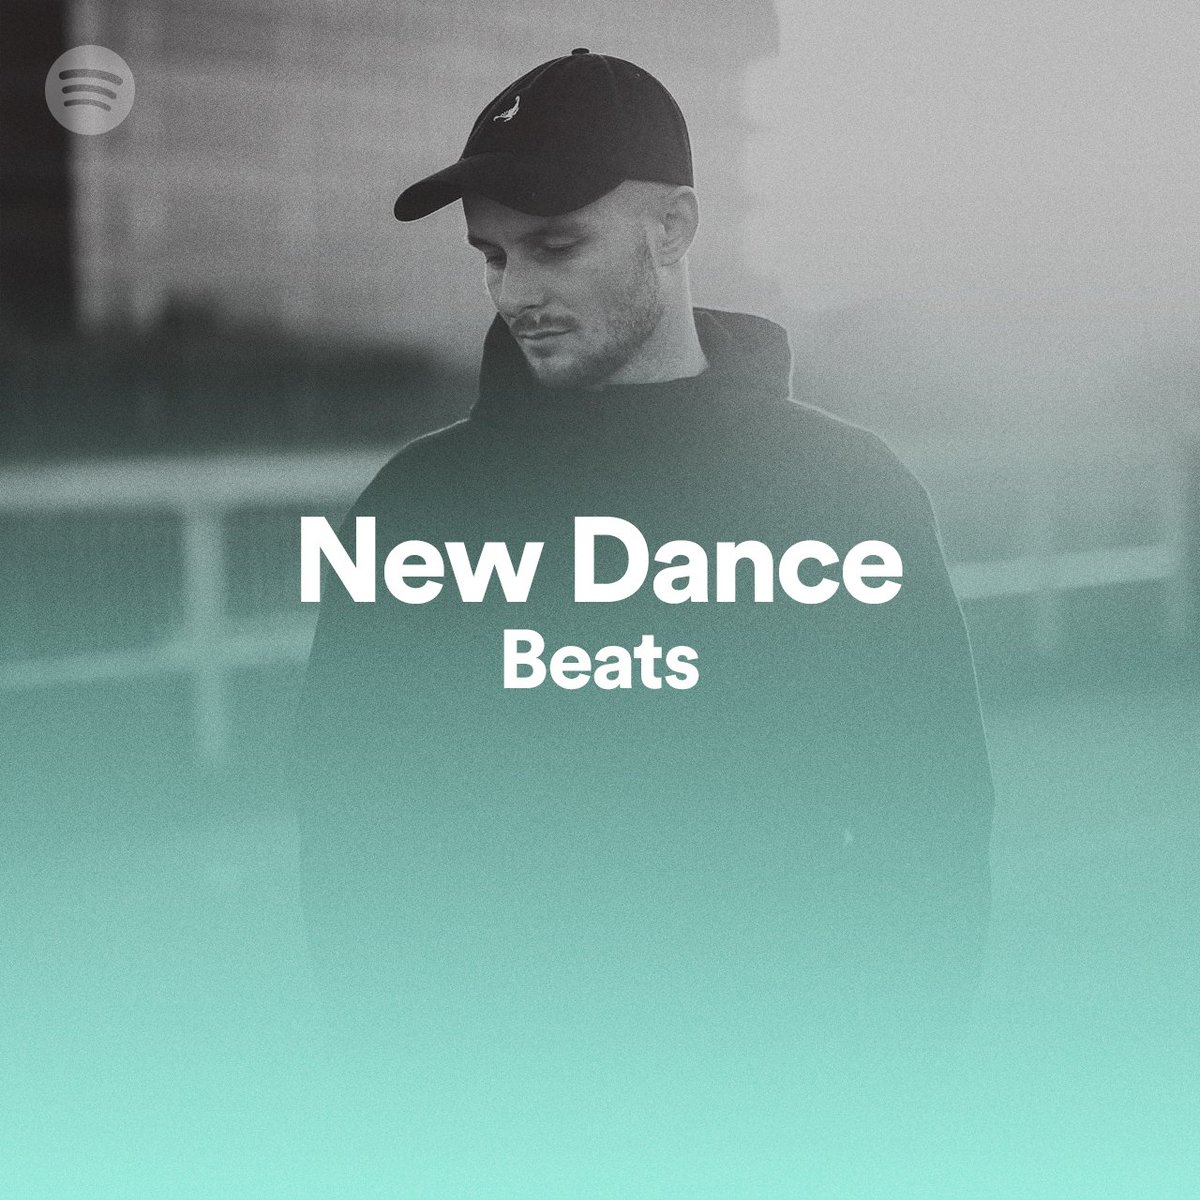 Monday morning, open @Spotify to see @palaismusic as the face of #NewDanceBeats 👌👌 stream his Apolis EP >> etcetc.lnk.to/ApolisEP